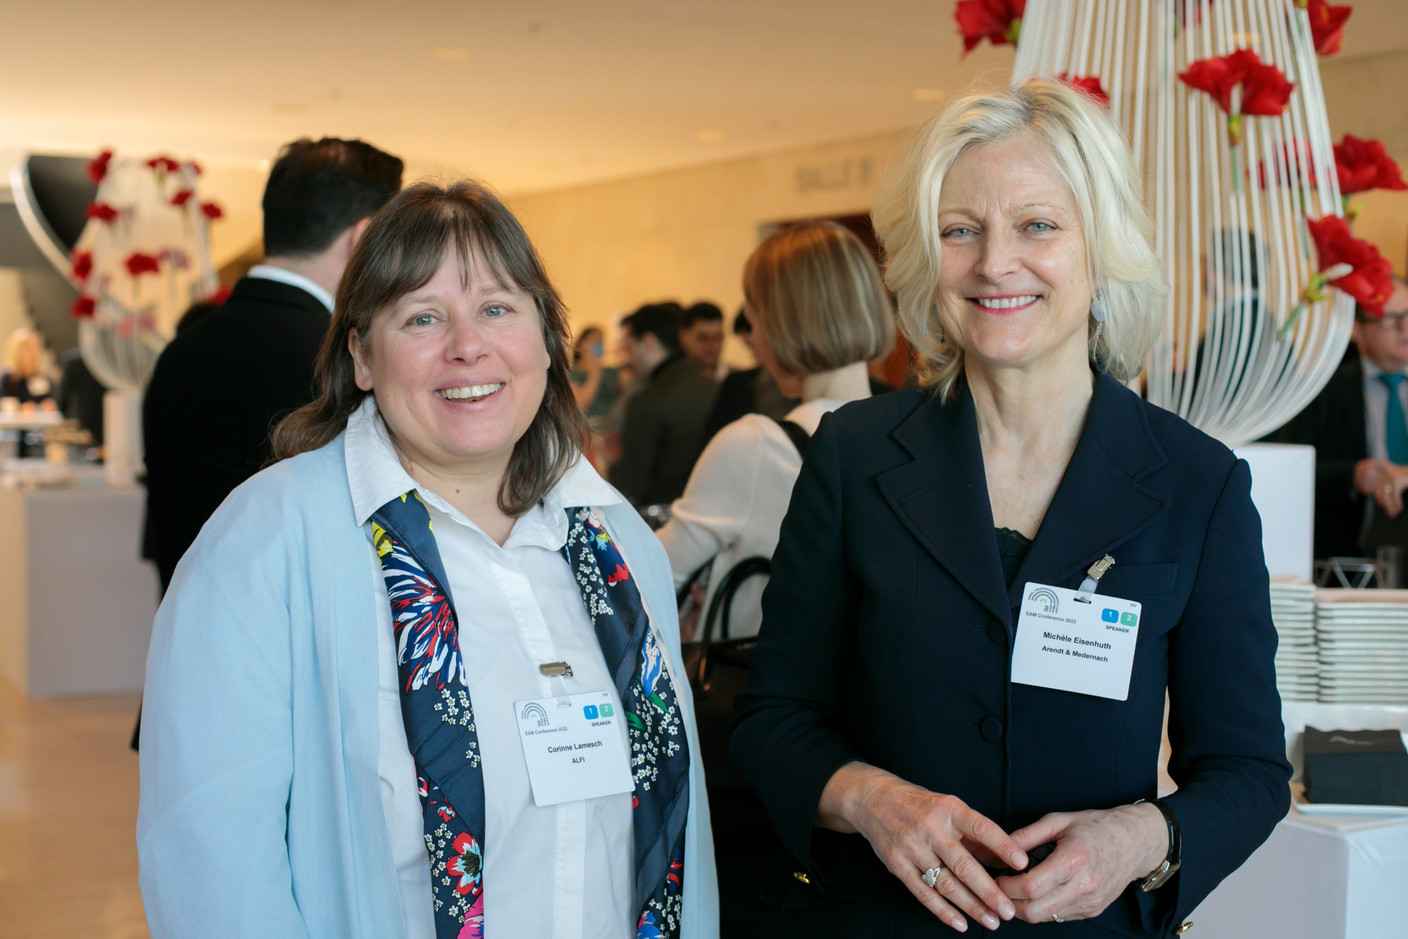 Corinne Lamesch, Association of the Luxembourg Fund Industry and Fidelity International; Michèle Eisenhuth, Arendt & Medernach. Photo: Matic Zorman